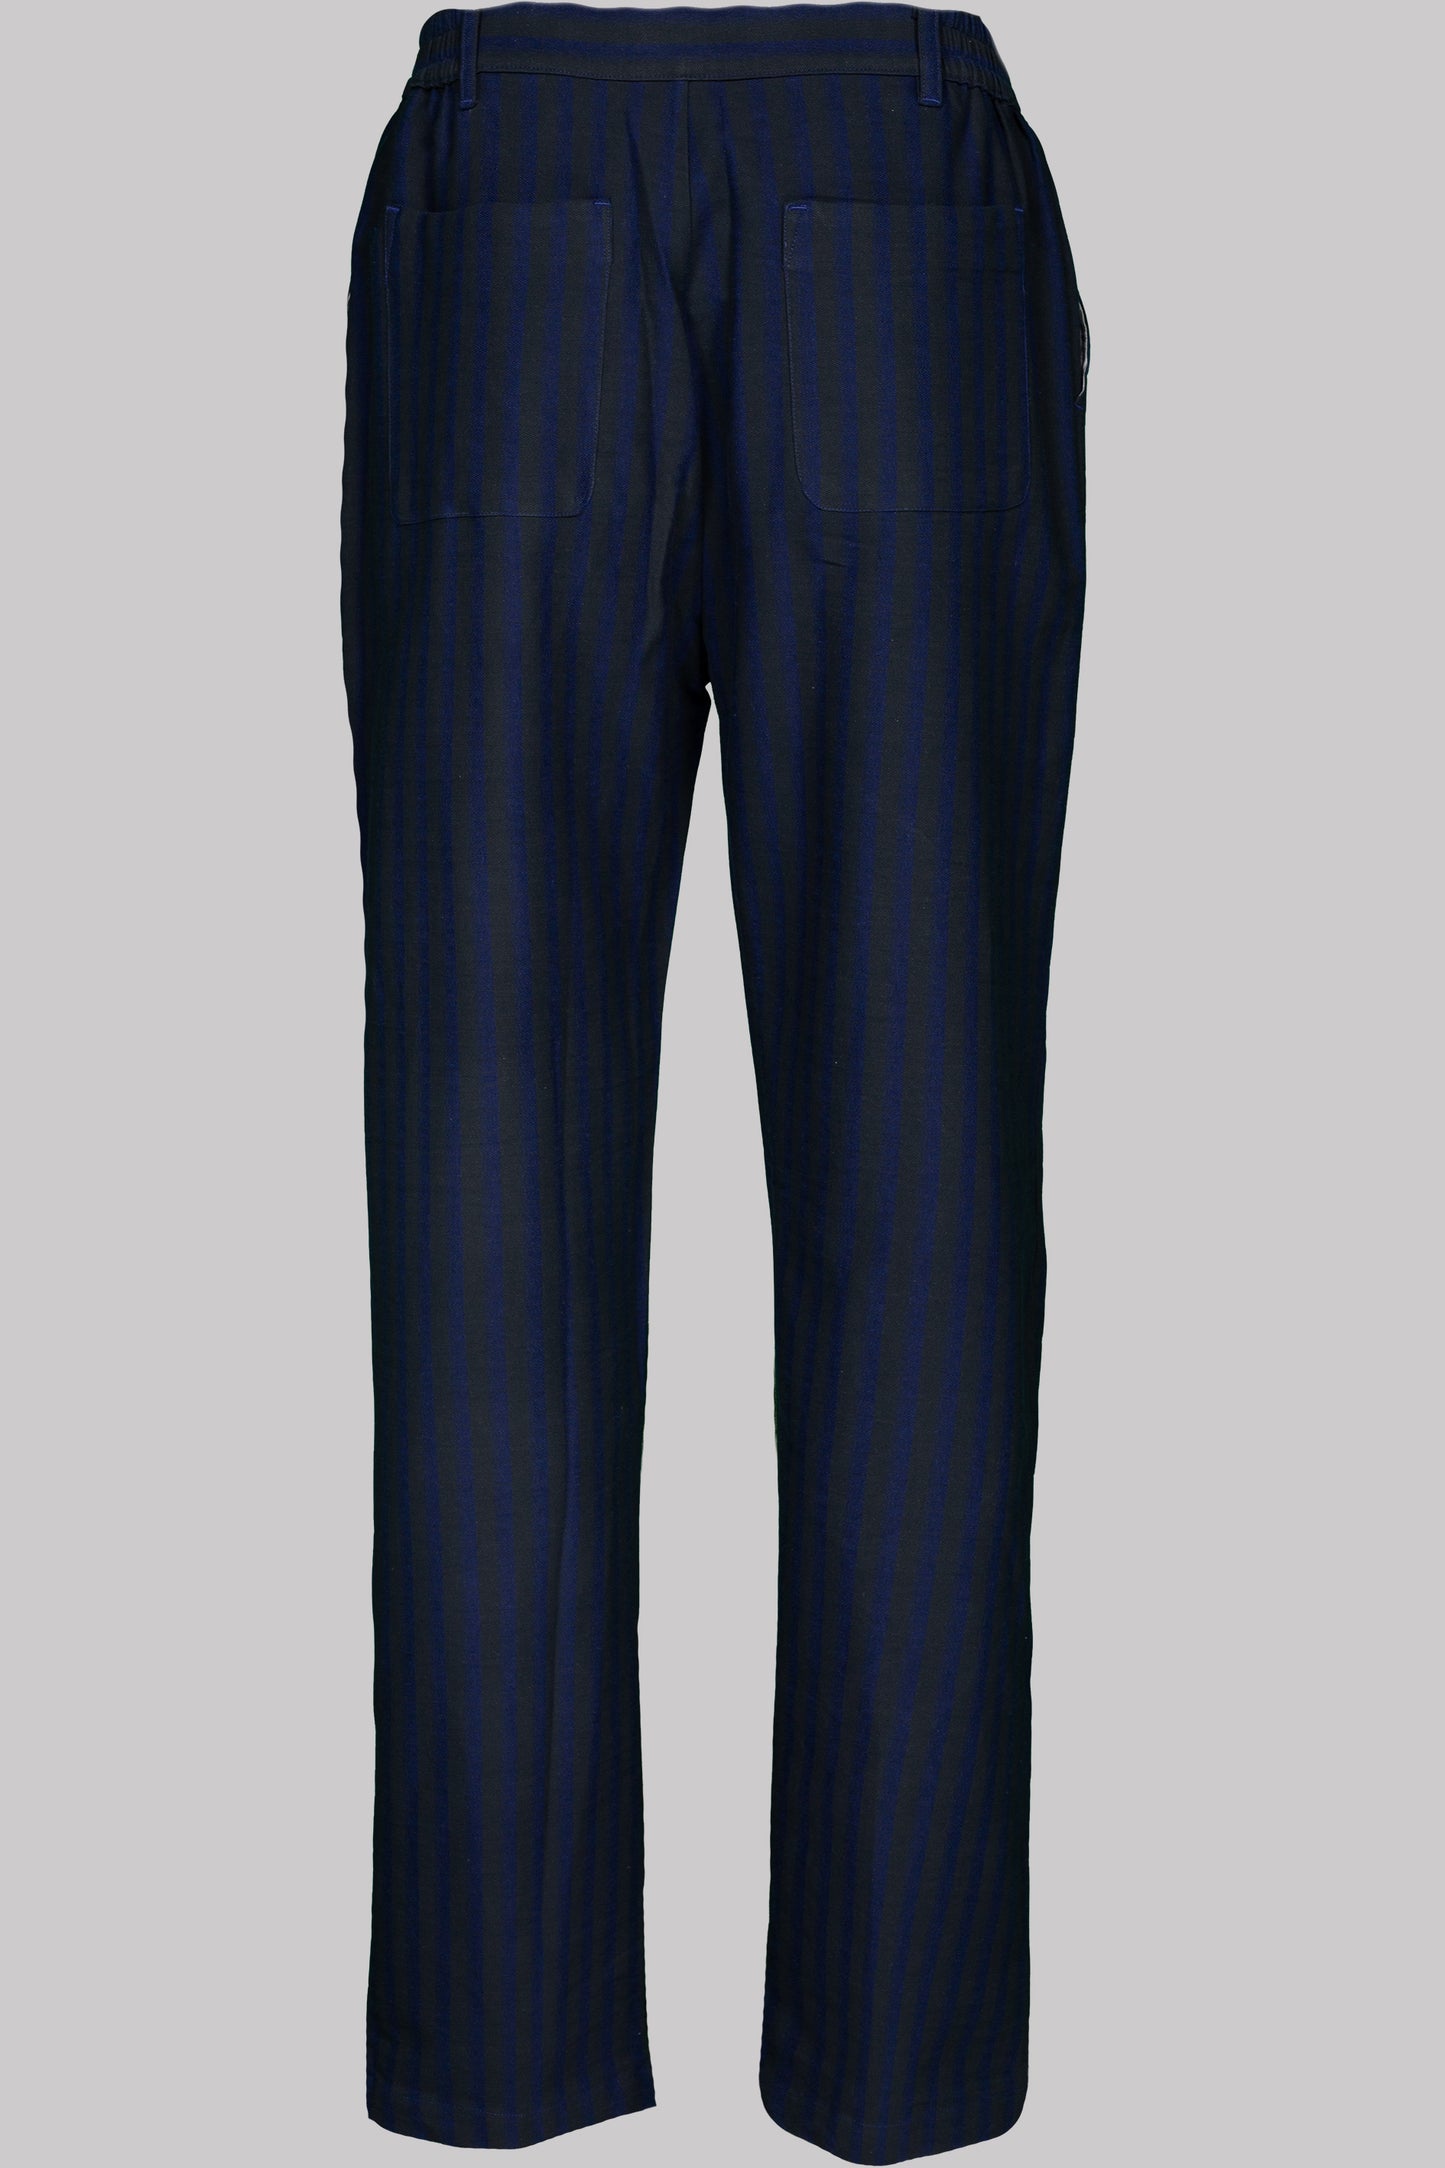 BUTTON-TROUSERS BLUE-Black 100% COTTON Herringbone-Thick, Brushed-inside Broad-Stripes screen-print